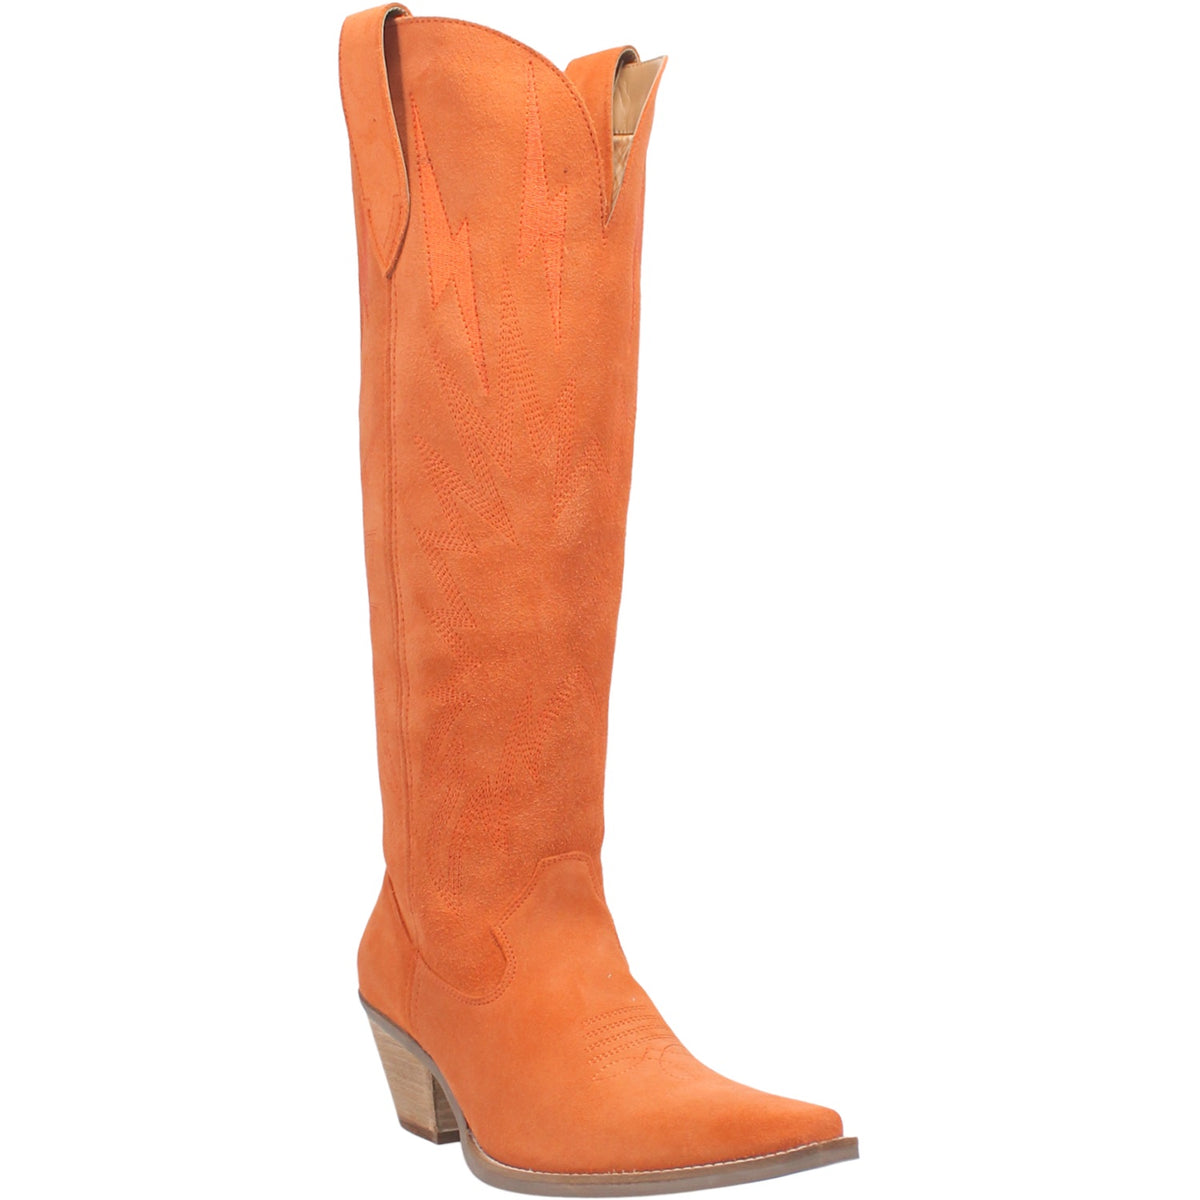 Thunder Road Leather Boot in Orange